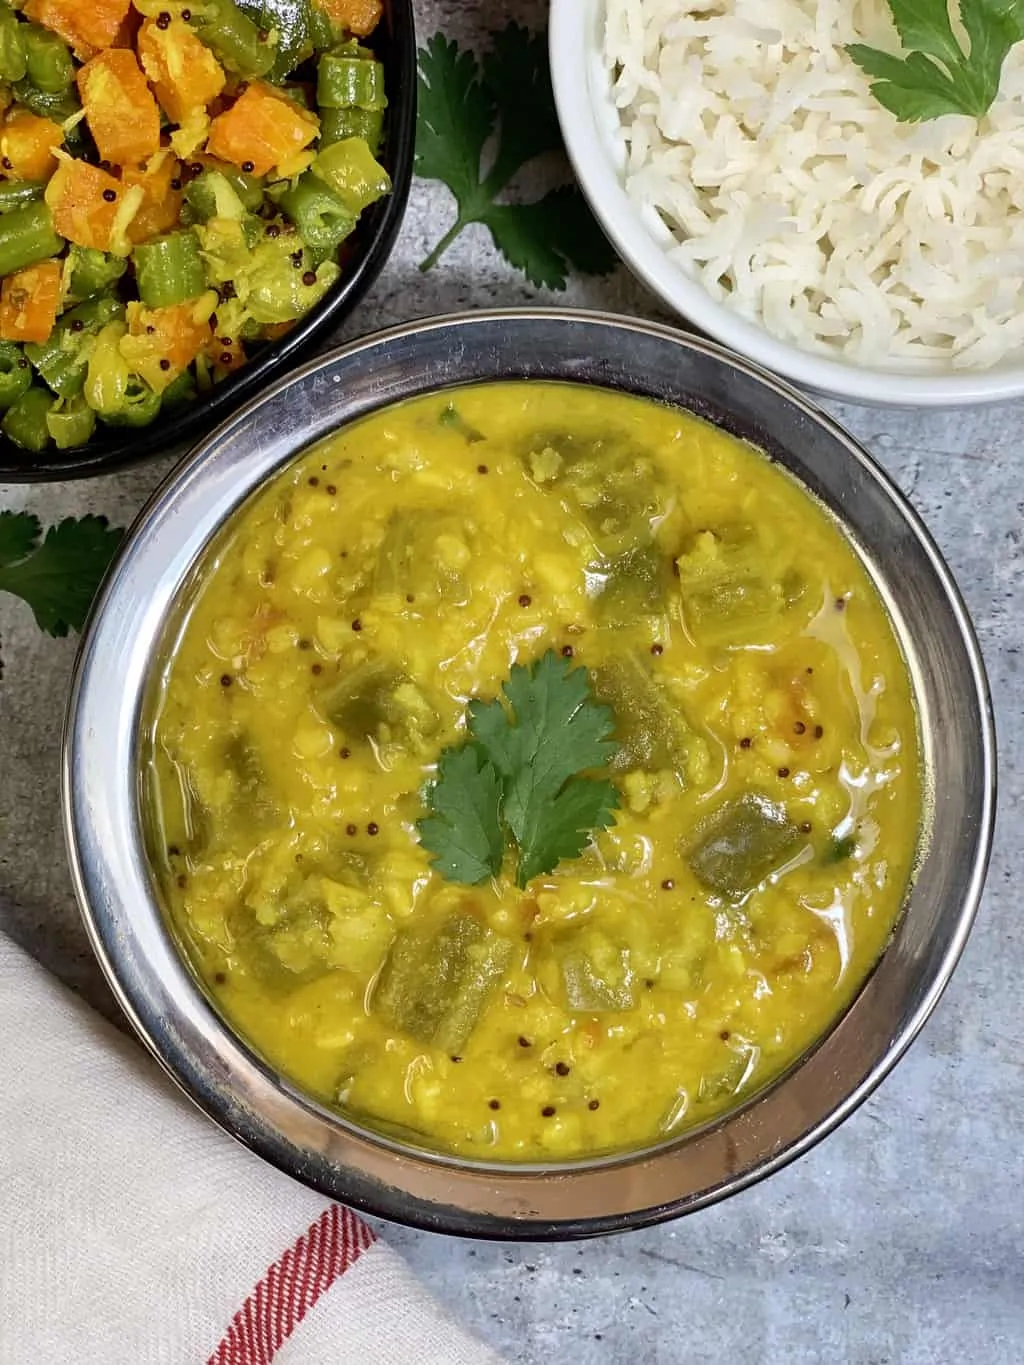 ridge gourd dal served in a bowl with poriyal and rice on the side